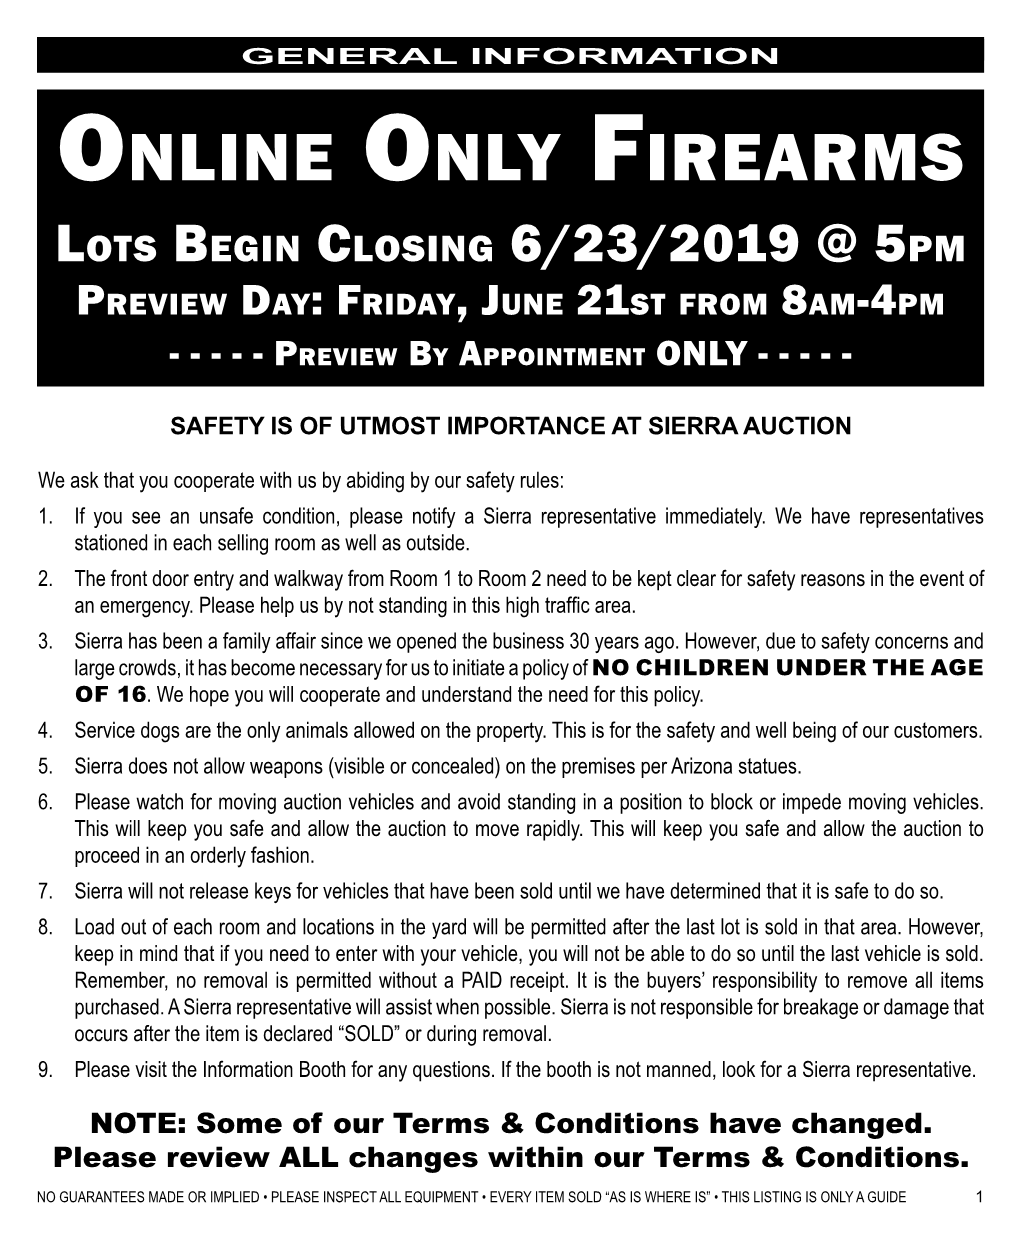 Online Only Firearms Lots Begin Closing 6/23/2019 @ 5Pm Preview Day: Friday, June 21St from 8Am-4Pm - - - - - Preview by Appointment ONLY - - - -